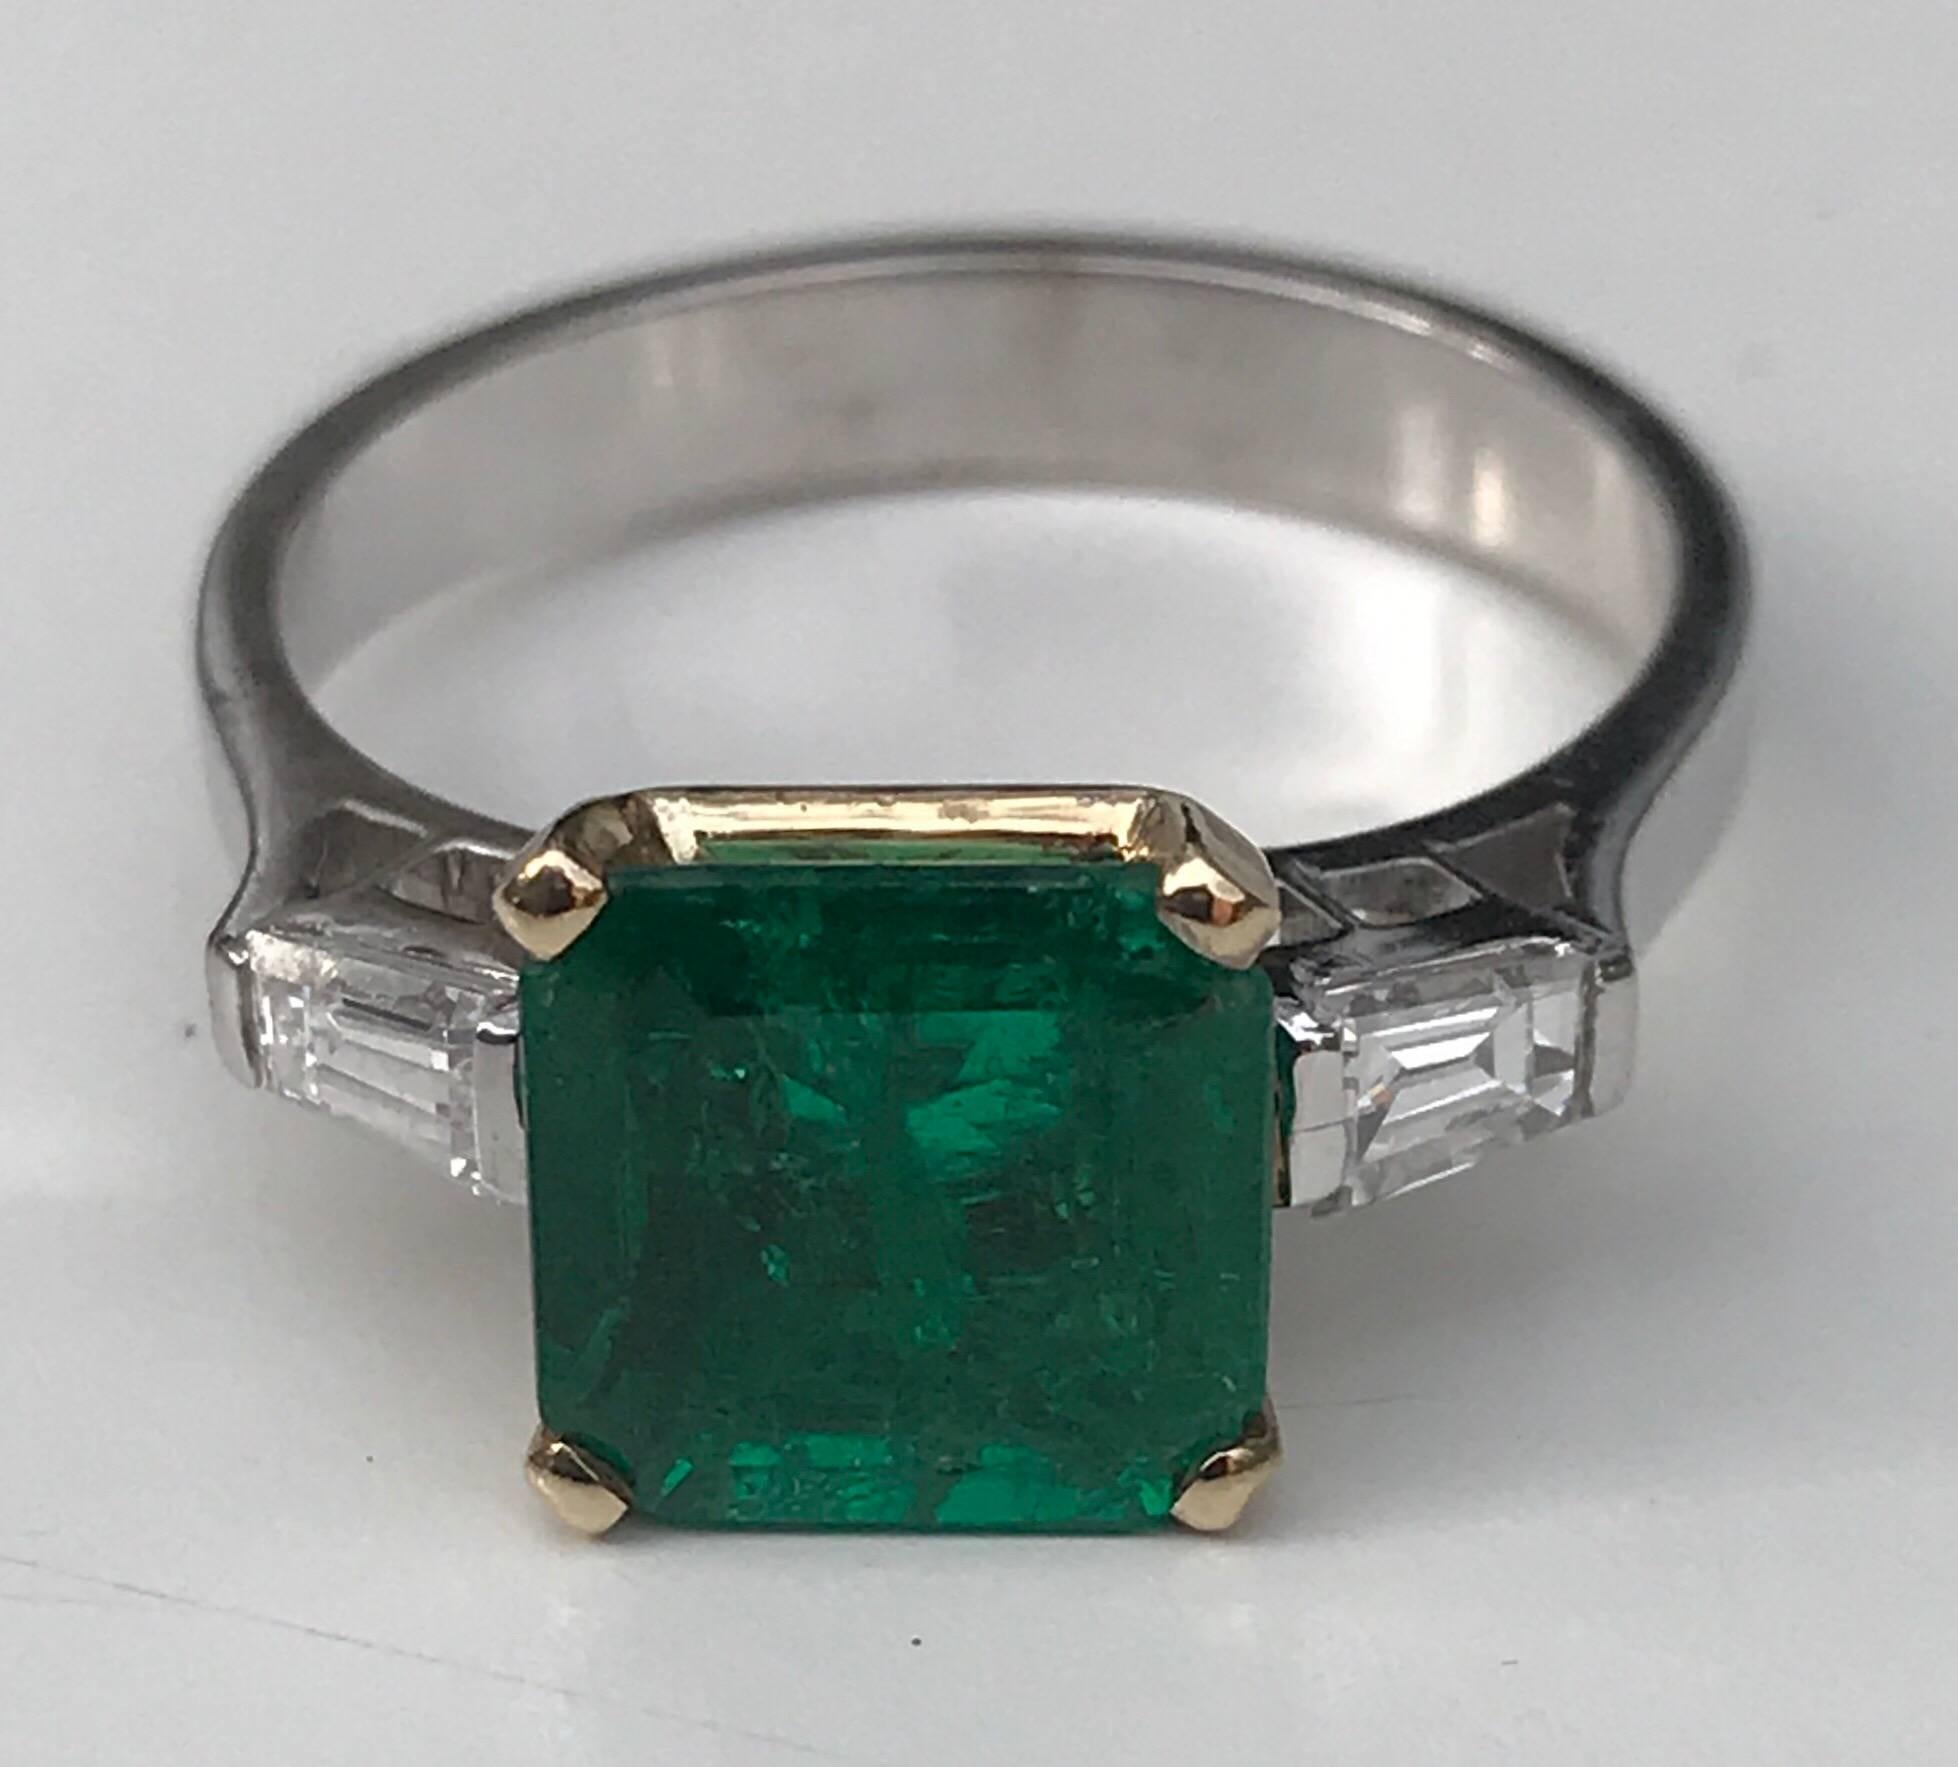 A fine Emerald and Diamond ring set in 18k white gold. The ring features an emerald-cut emerald of approx 1.76 carats with two radiant cut diamond side stones of approx .15 carats set to a plain white gold band
Hallmarks: unmarked
Weight: 4.5